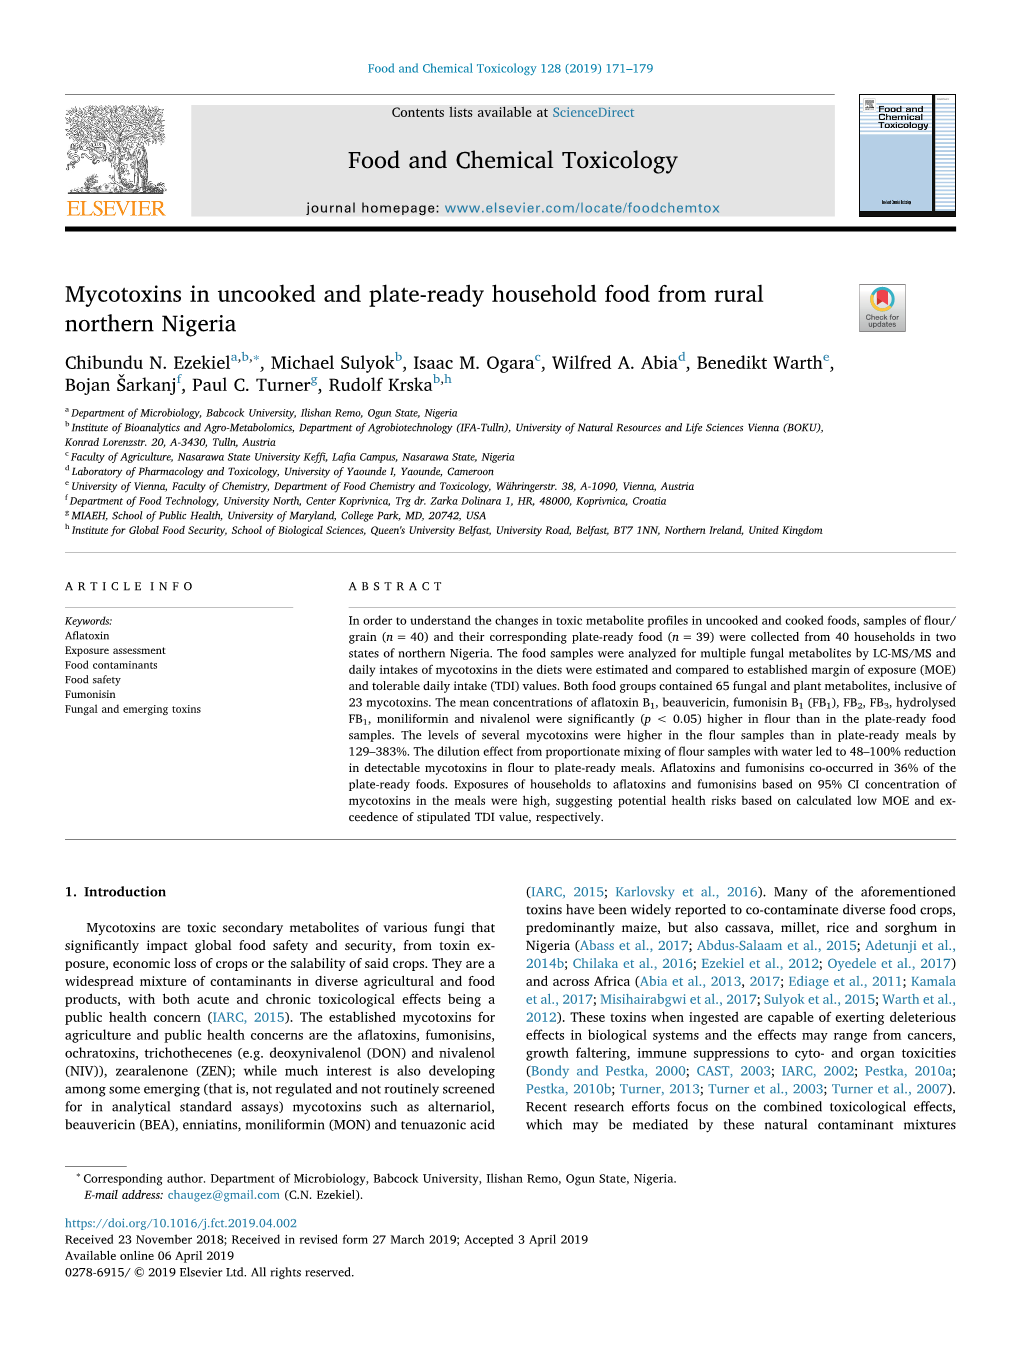 Mycotoxins in Uncooked and Plate-Ready Household Food from Rural Northern Nigeria T